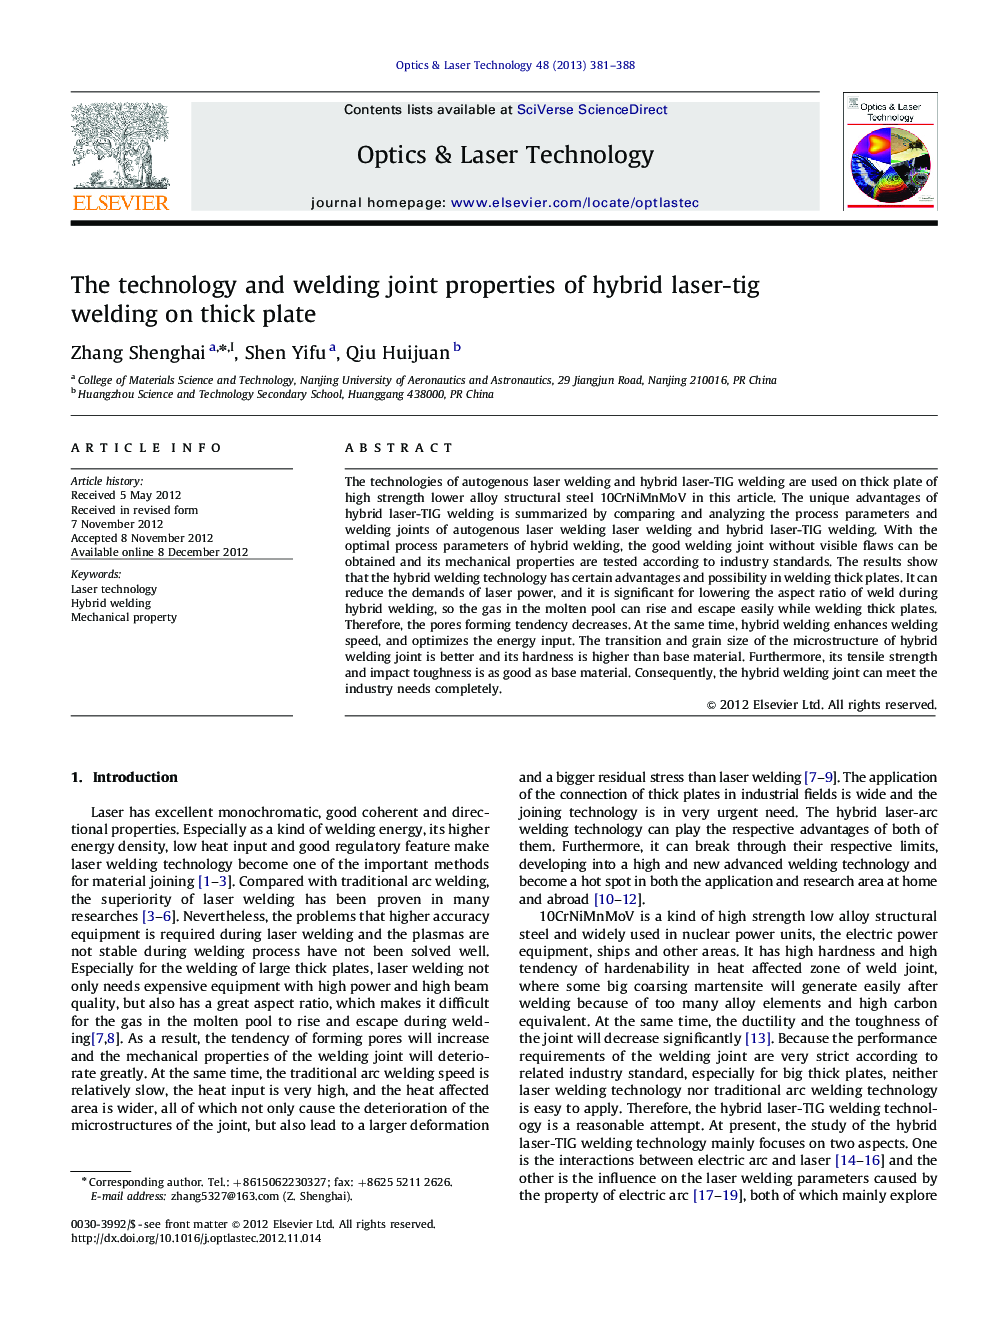 The technology and welding joint properties of hybrid laser-tig welding on thick plate